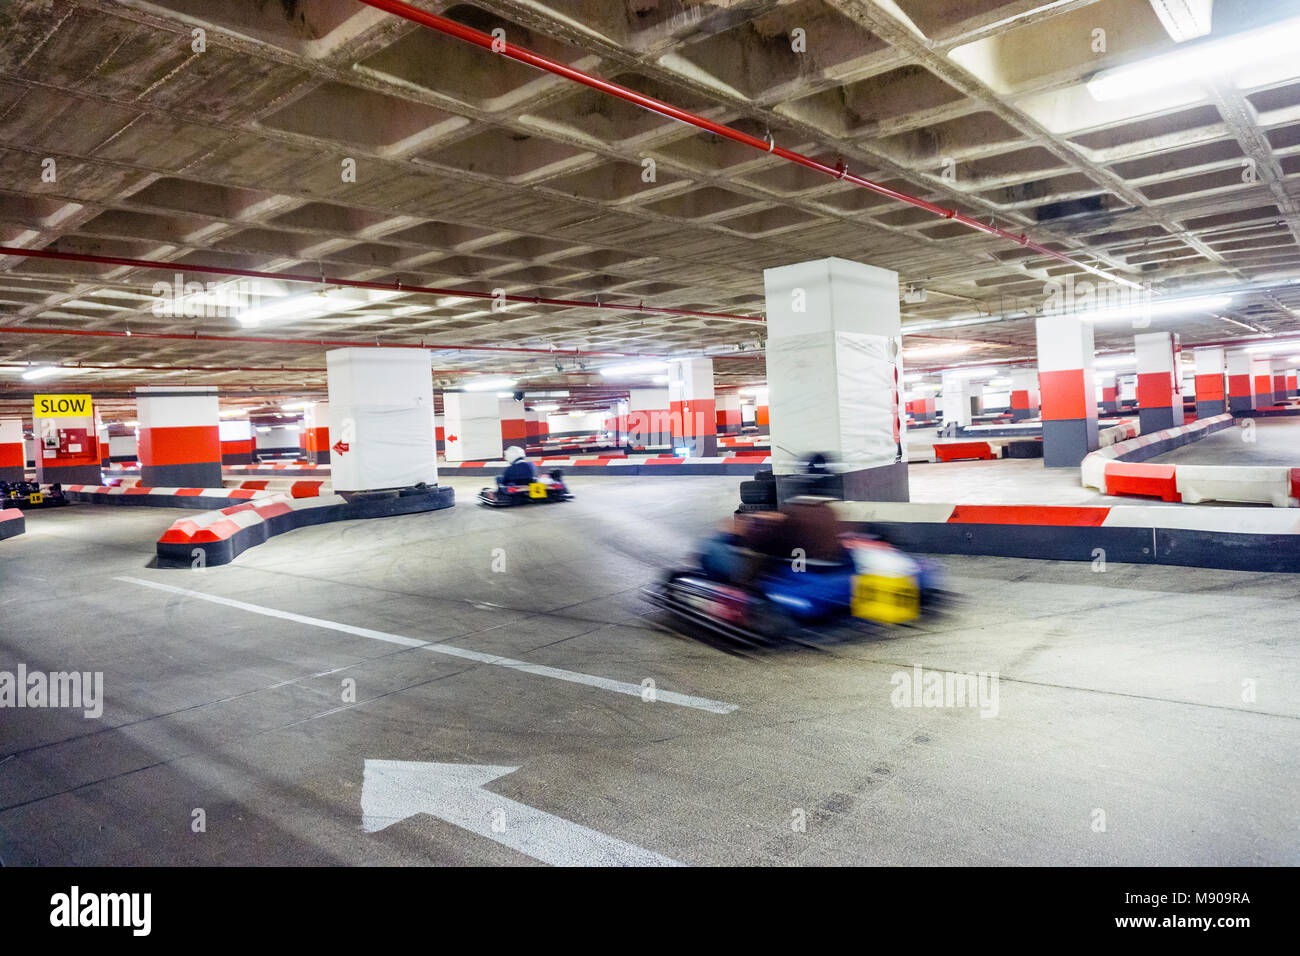 Two people racing on indoor karting track located in underground parking lot Stock Photo